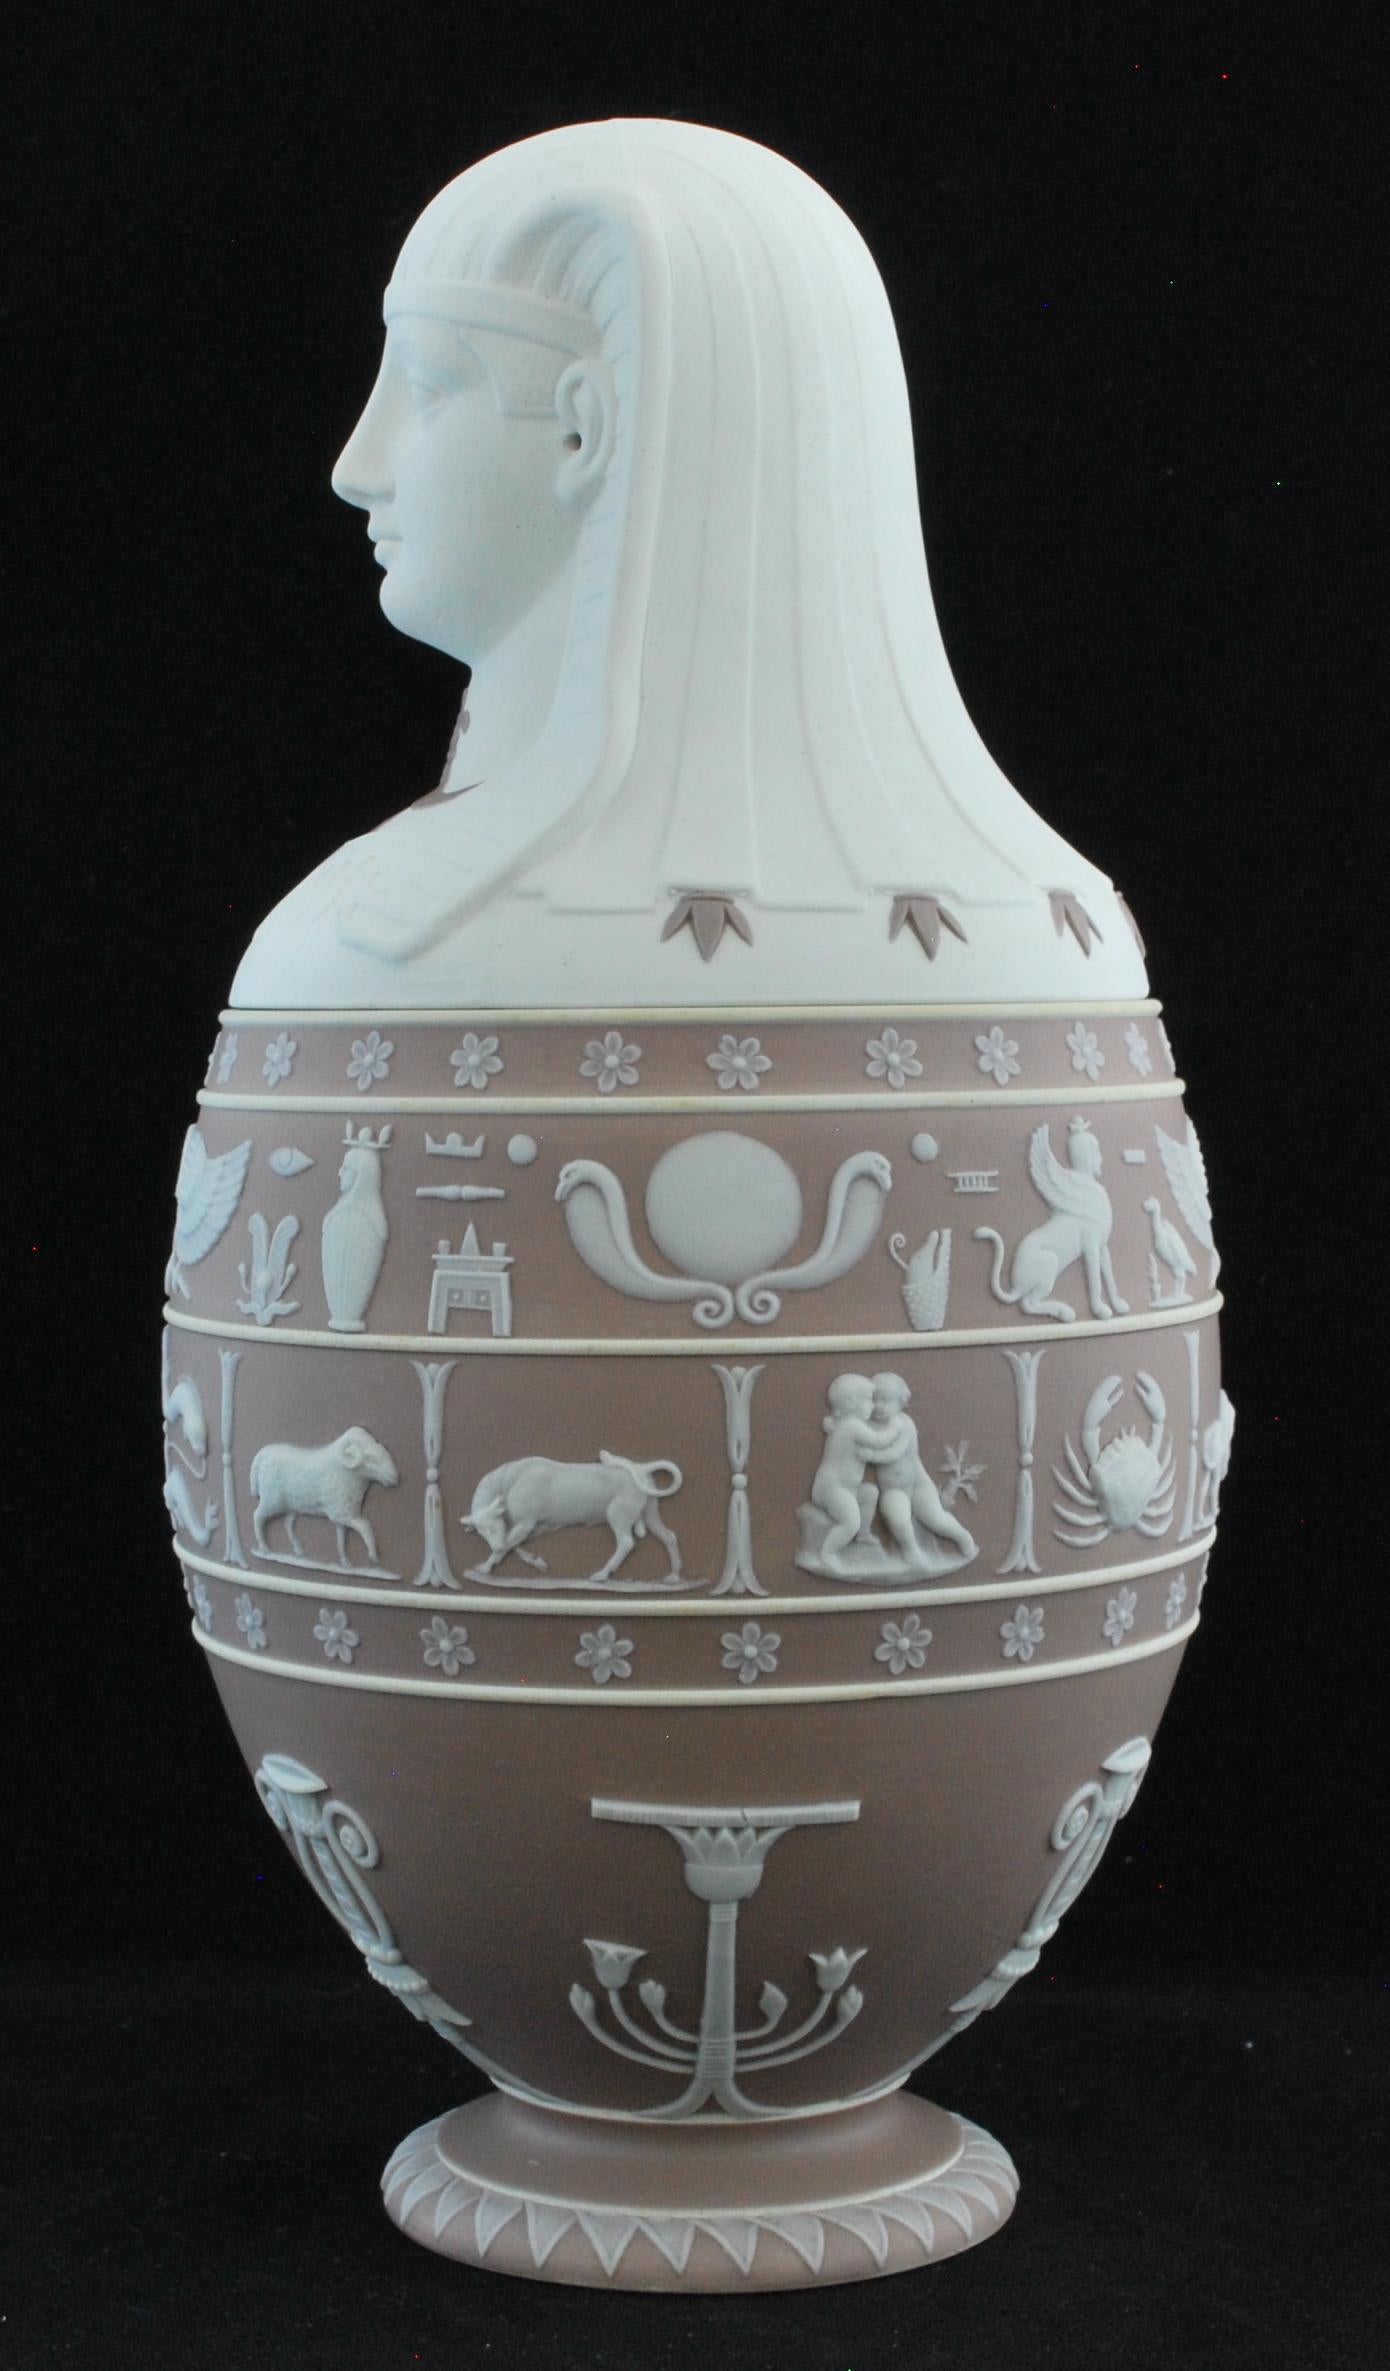 A superb canopic jar in lilac and white jasper, artfully combining features and pseudo-hieroglyphs taken from D’Hancarville’s Antiquities.

These were produced by Wedgwood from time to time, in response to public interest in things Egyptian. There